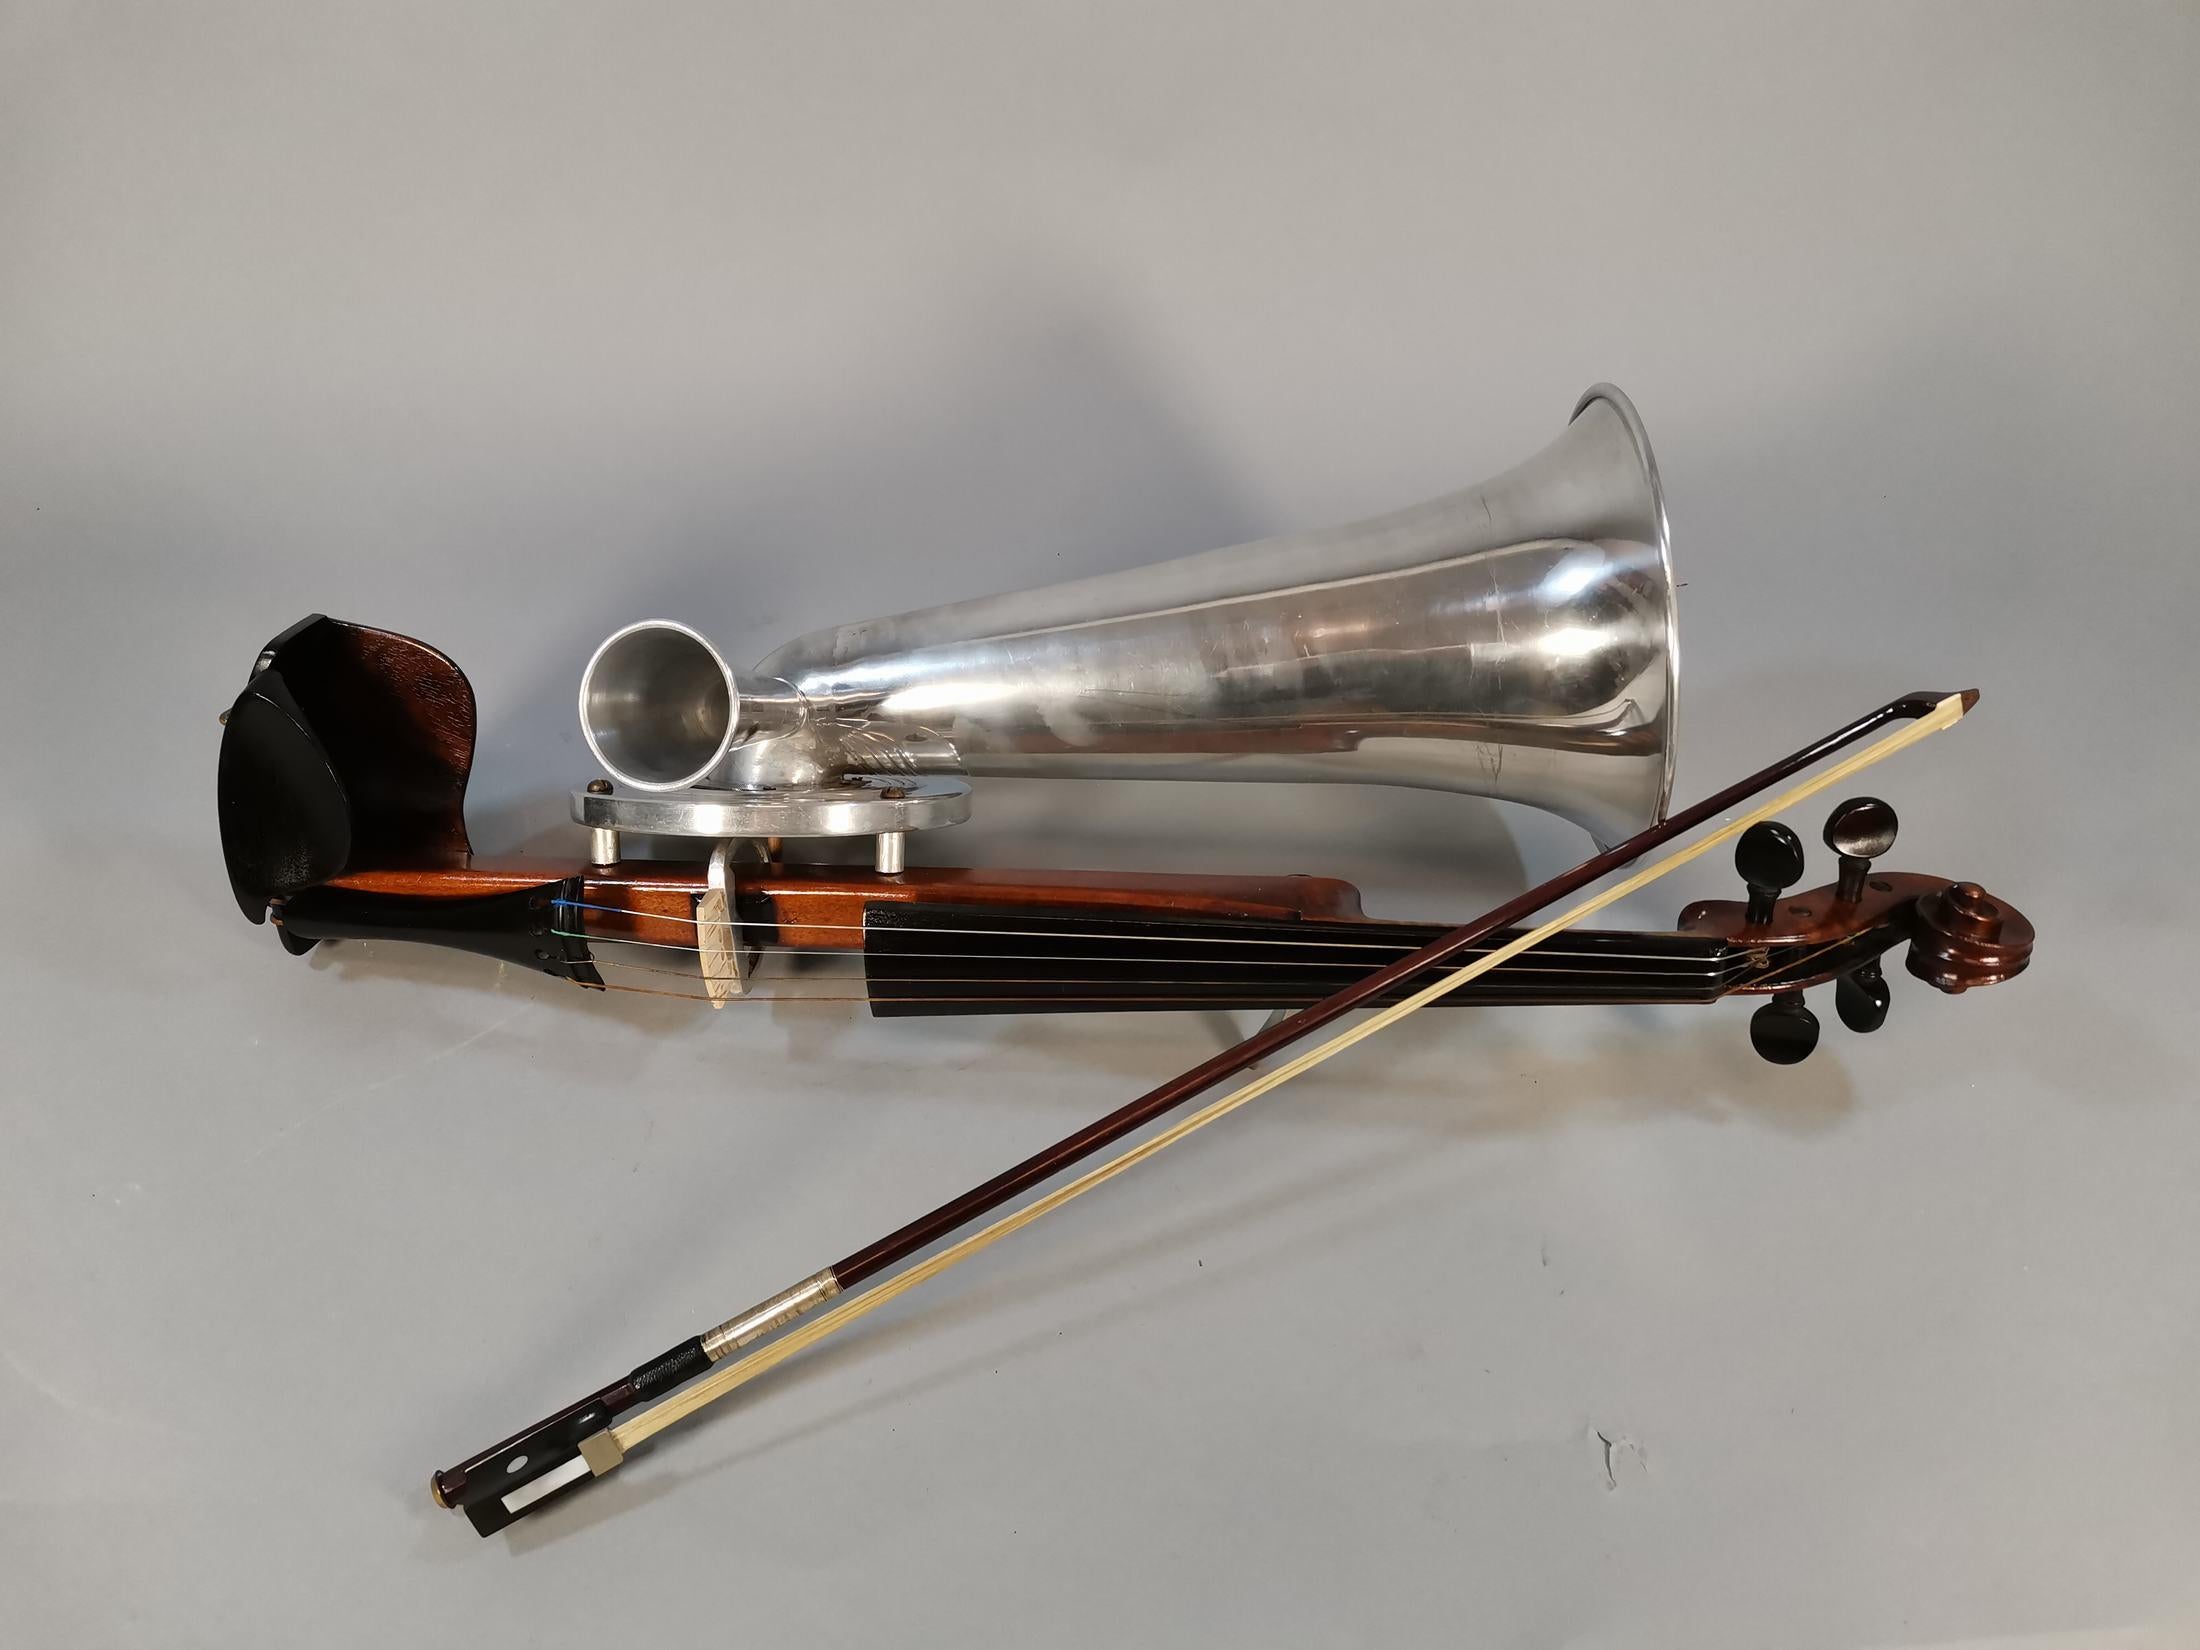 The Stroh or Stroviol violin is a type of stringed musical instrument that is mechanically amplified by a metallic resonator and a horn attached to its body. The name Stroviol refers to a violin, but other instruments have been modified with the